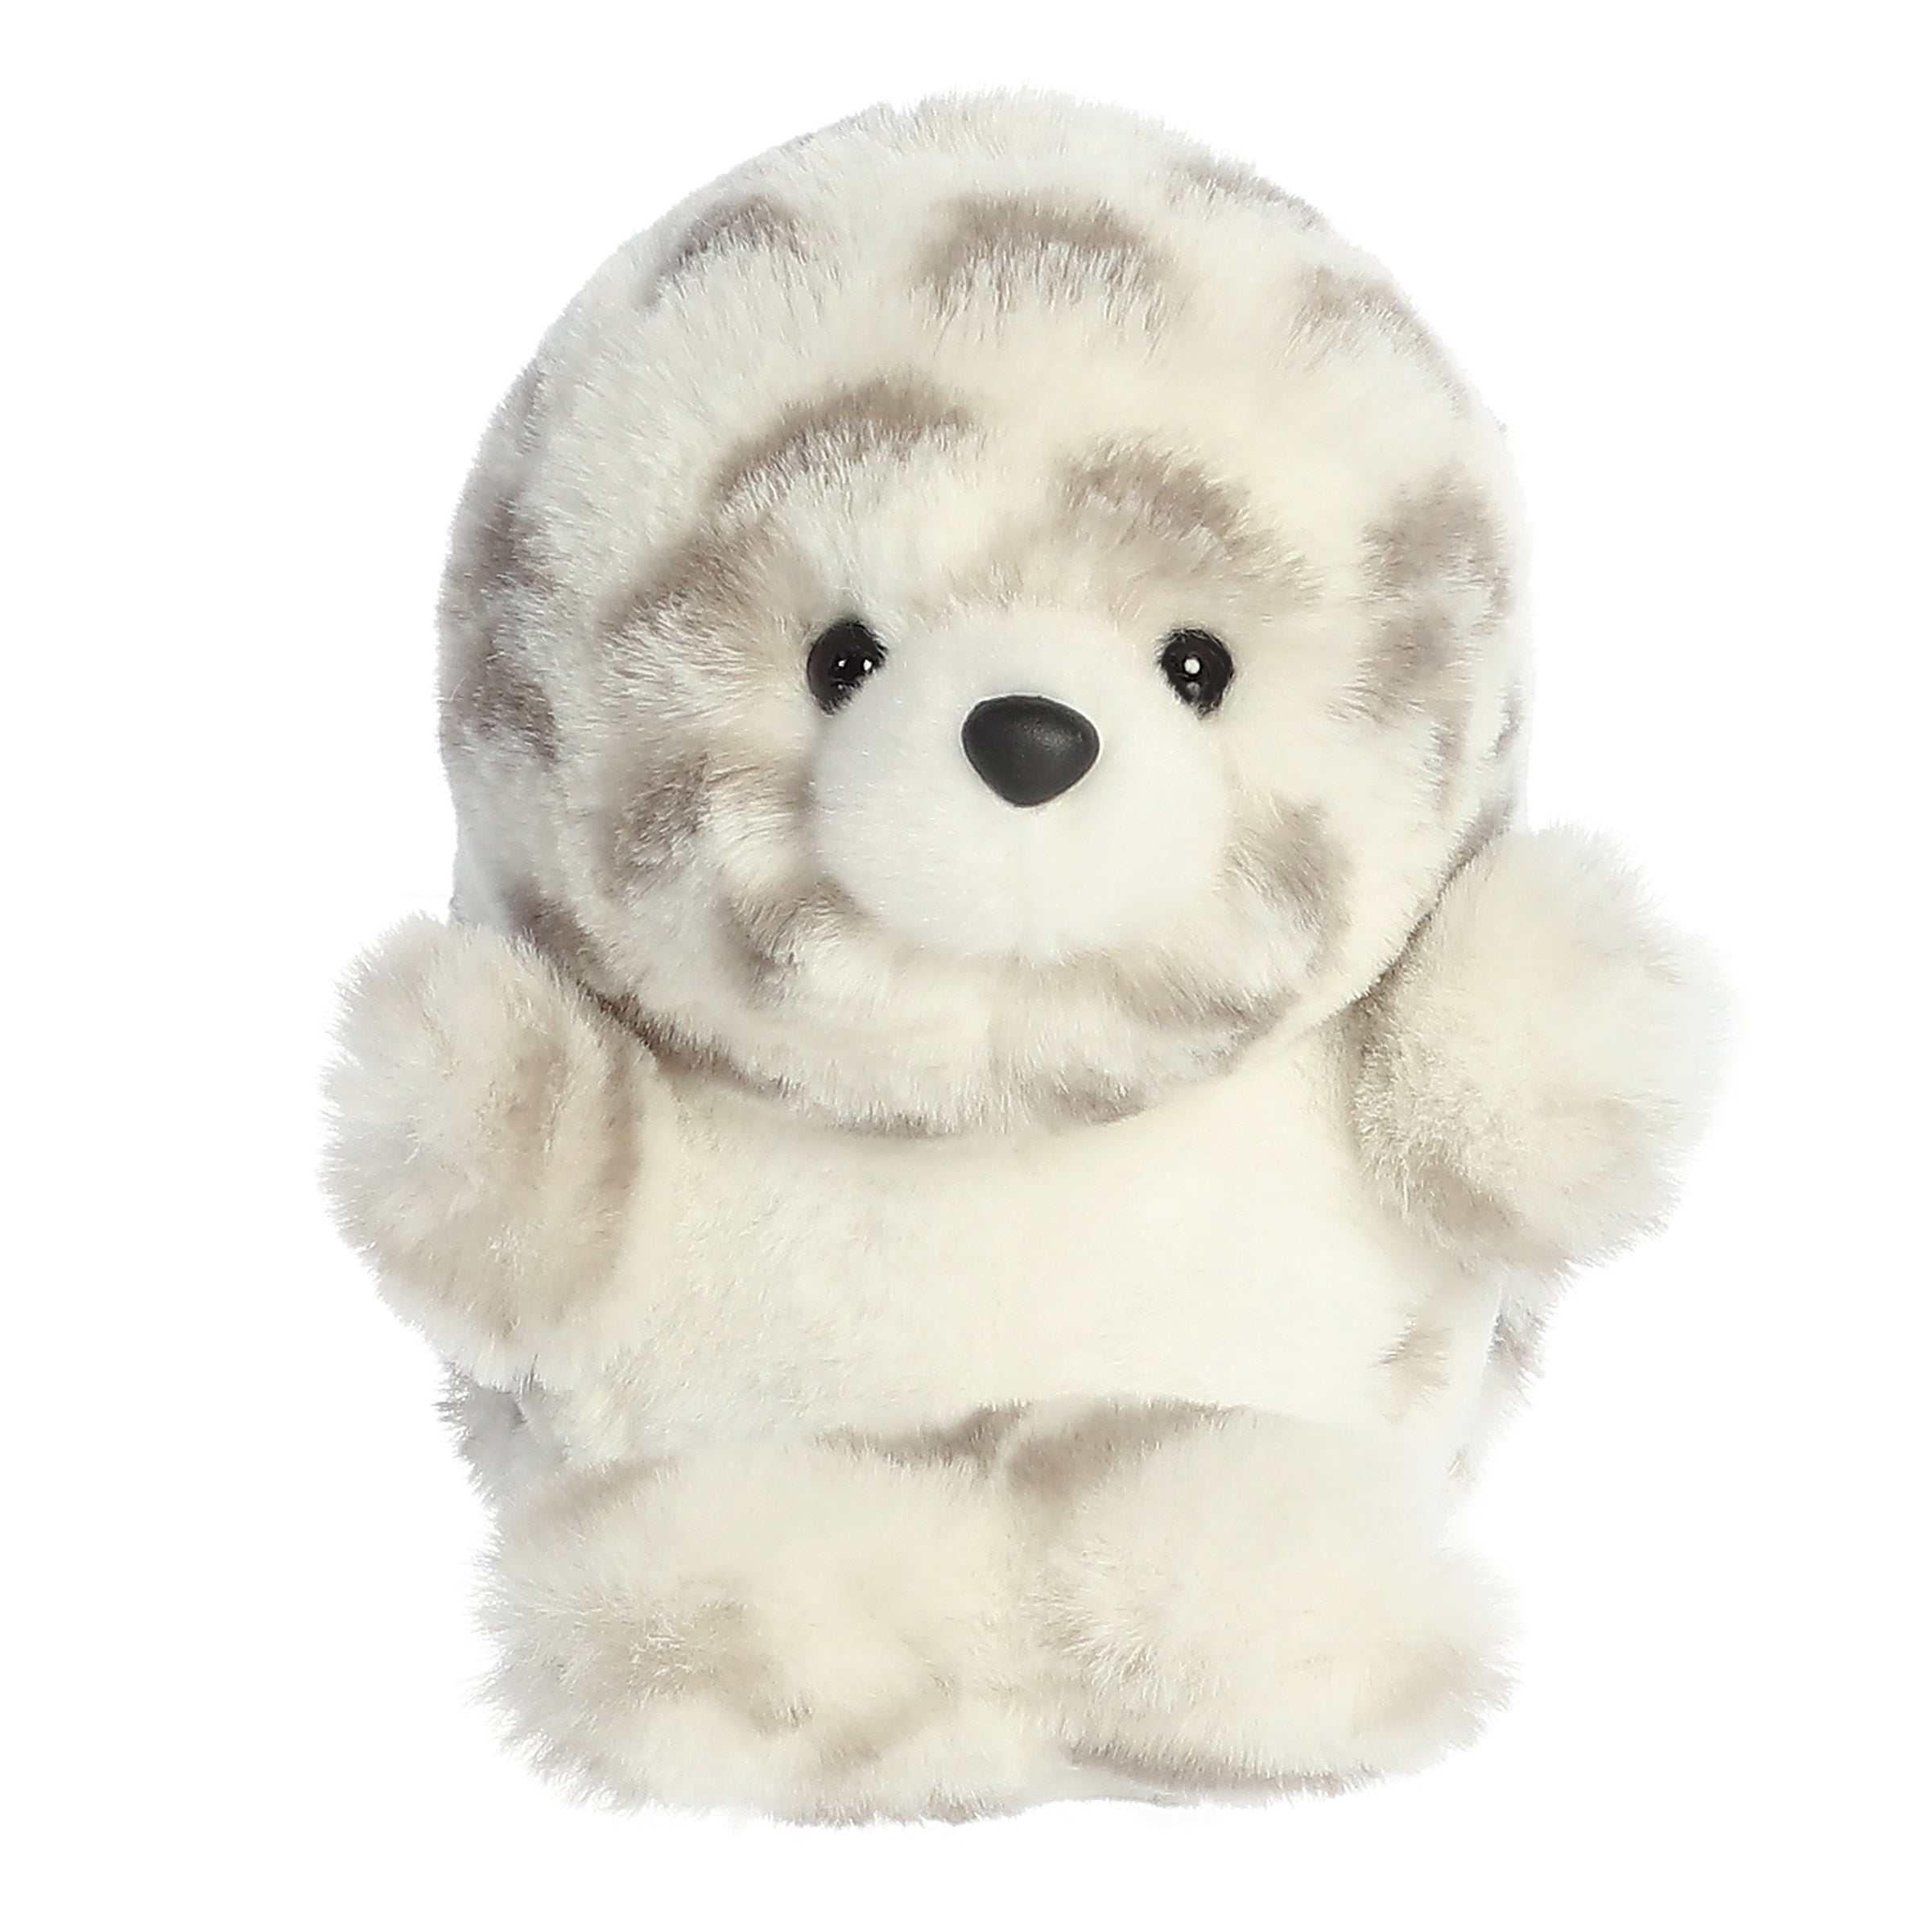 A Seal plush with white and gray spots, balancing adorably, ready for cuddles with an extra-fluffy head and charming pose.